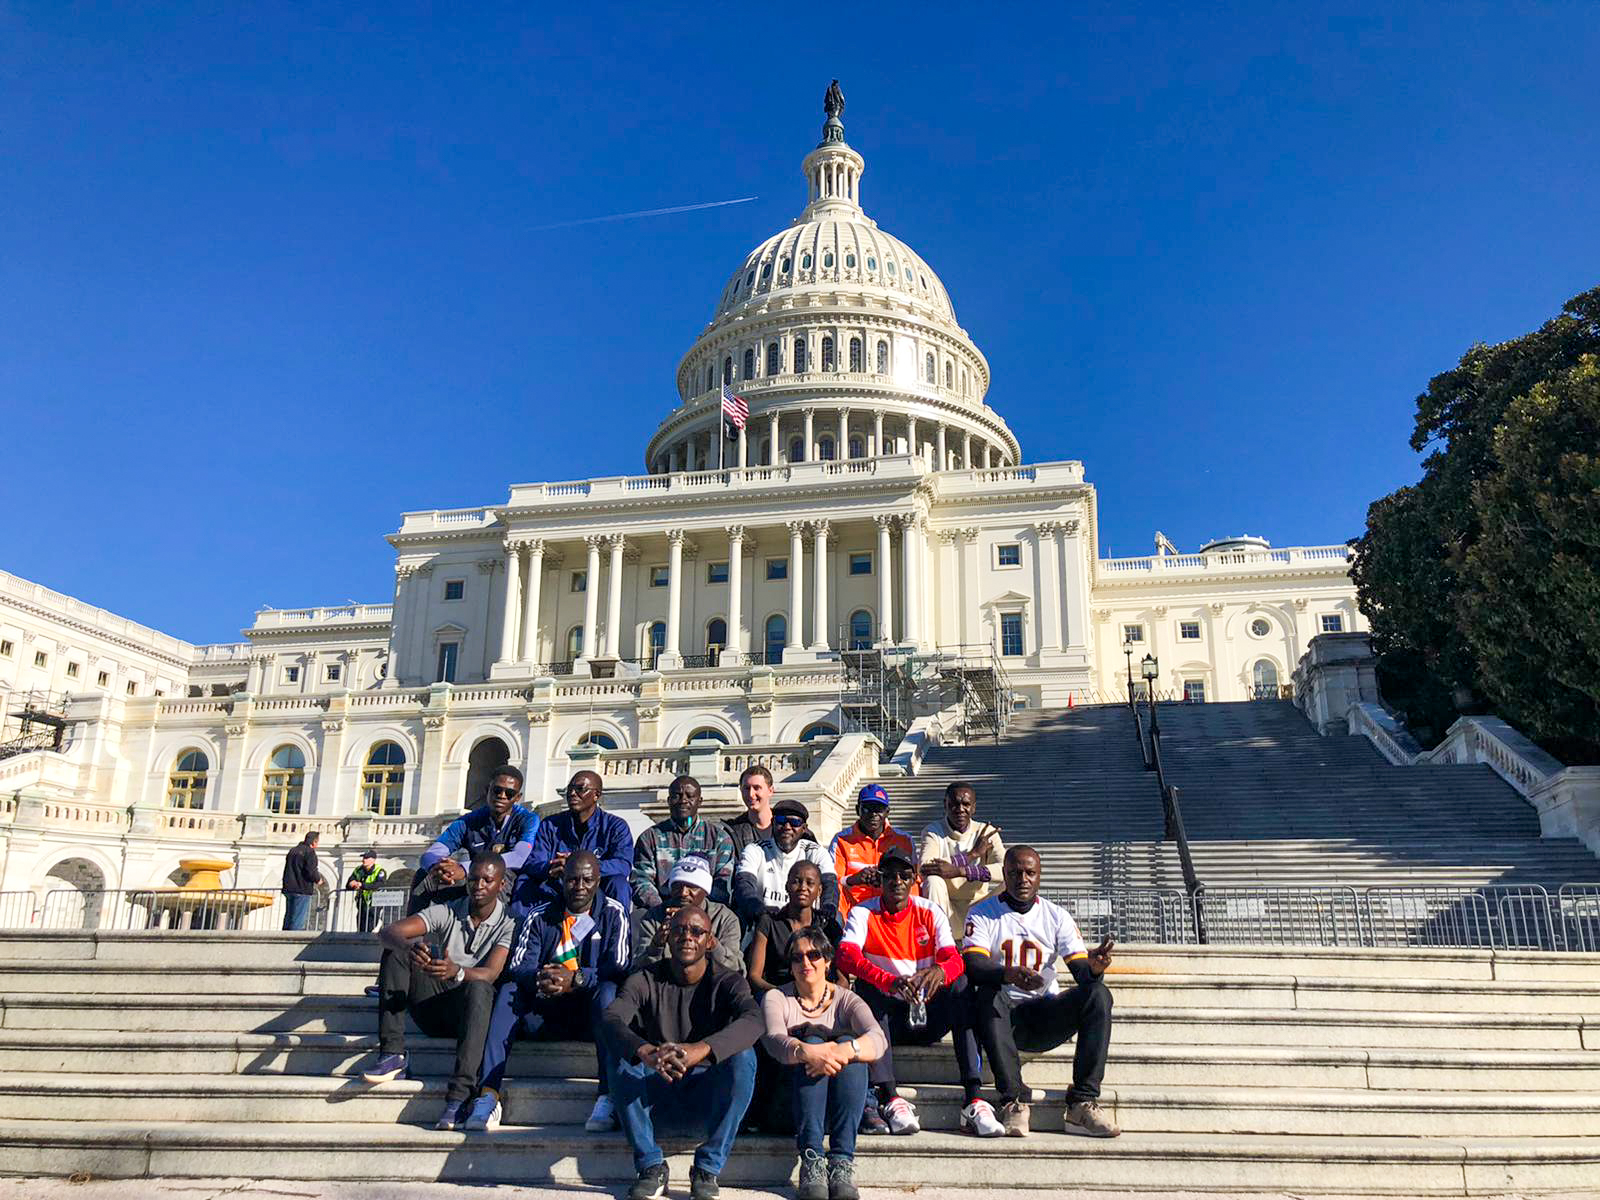 Soccer coaches from Niger visit the Capitol